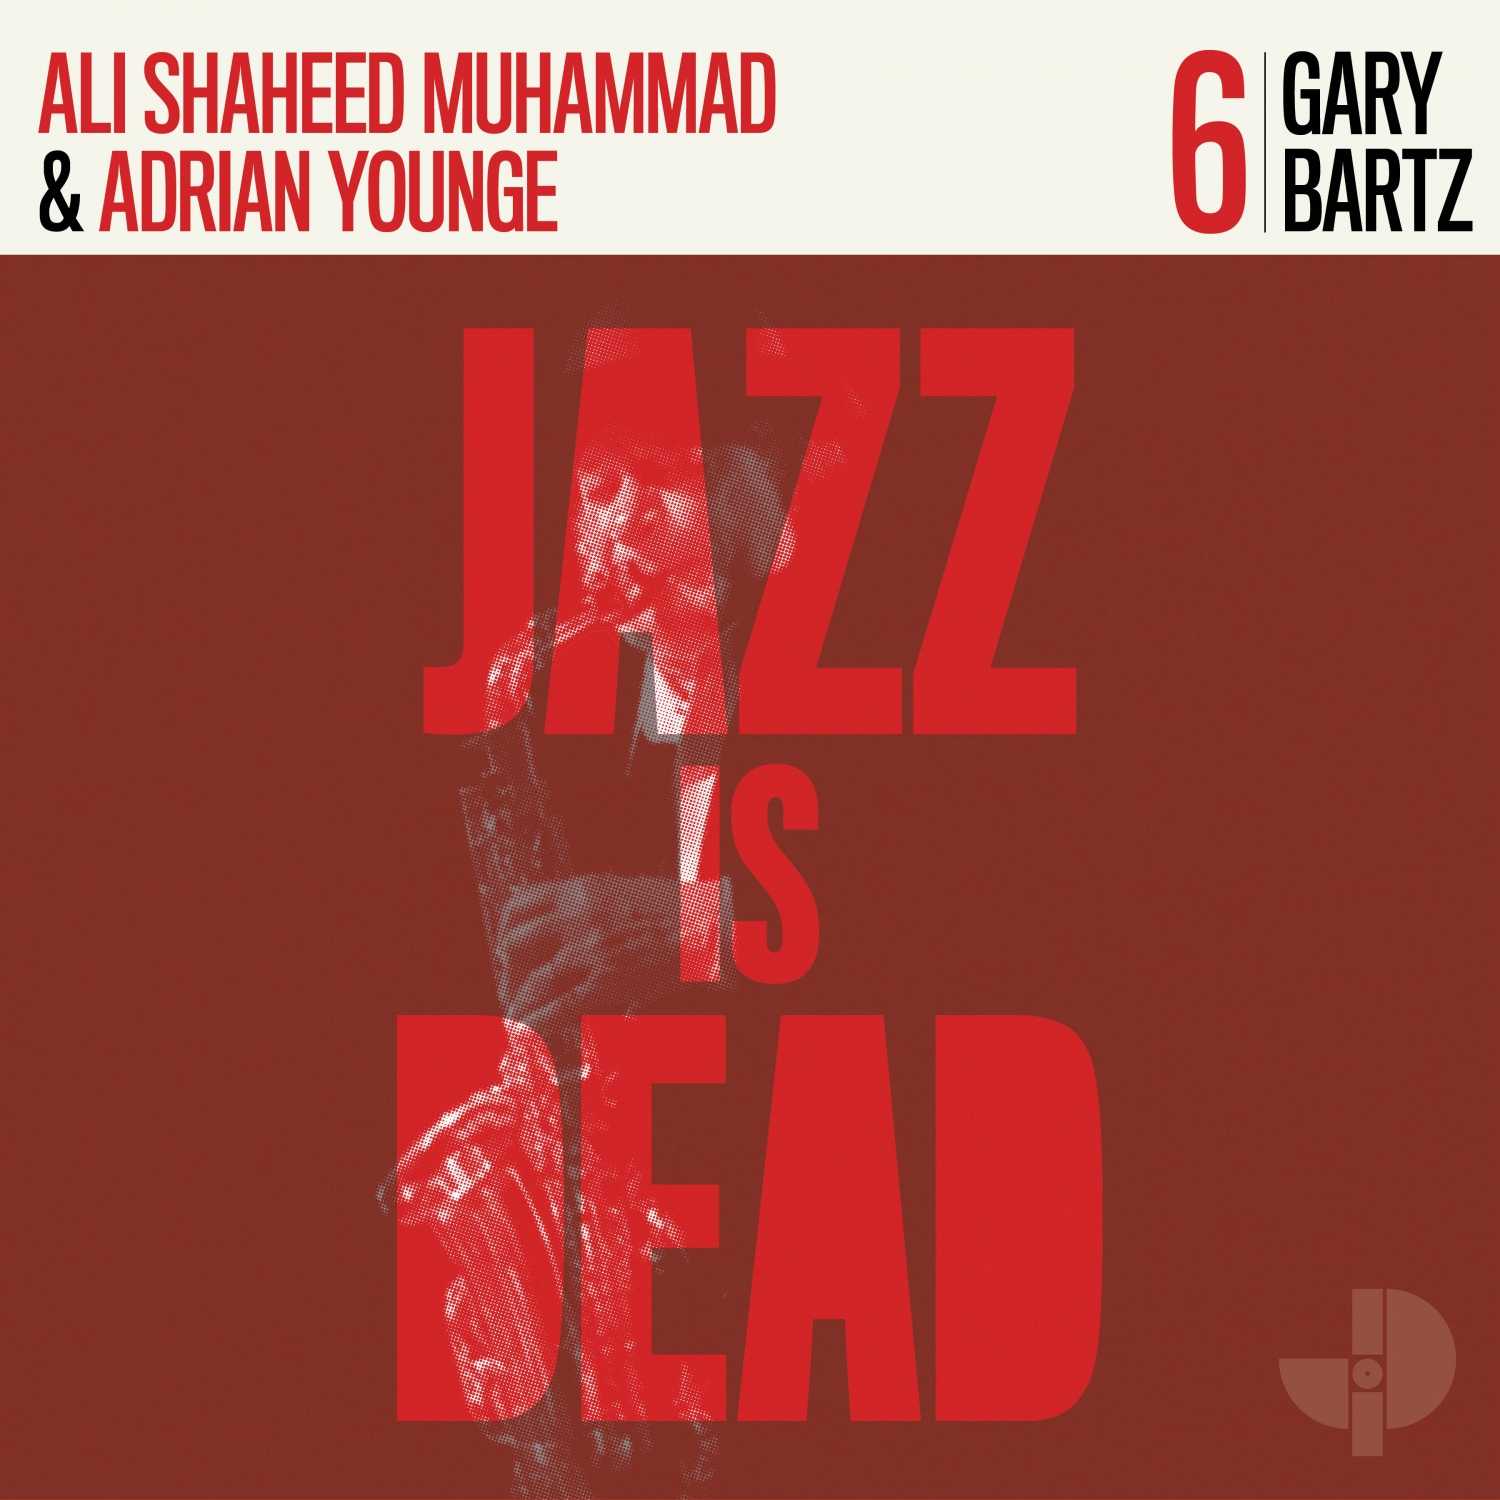 Art for Day By Day by Gary Bartz, Ali Shaheed Muhammad & Adrian Younge